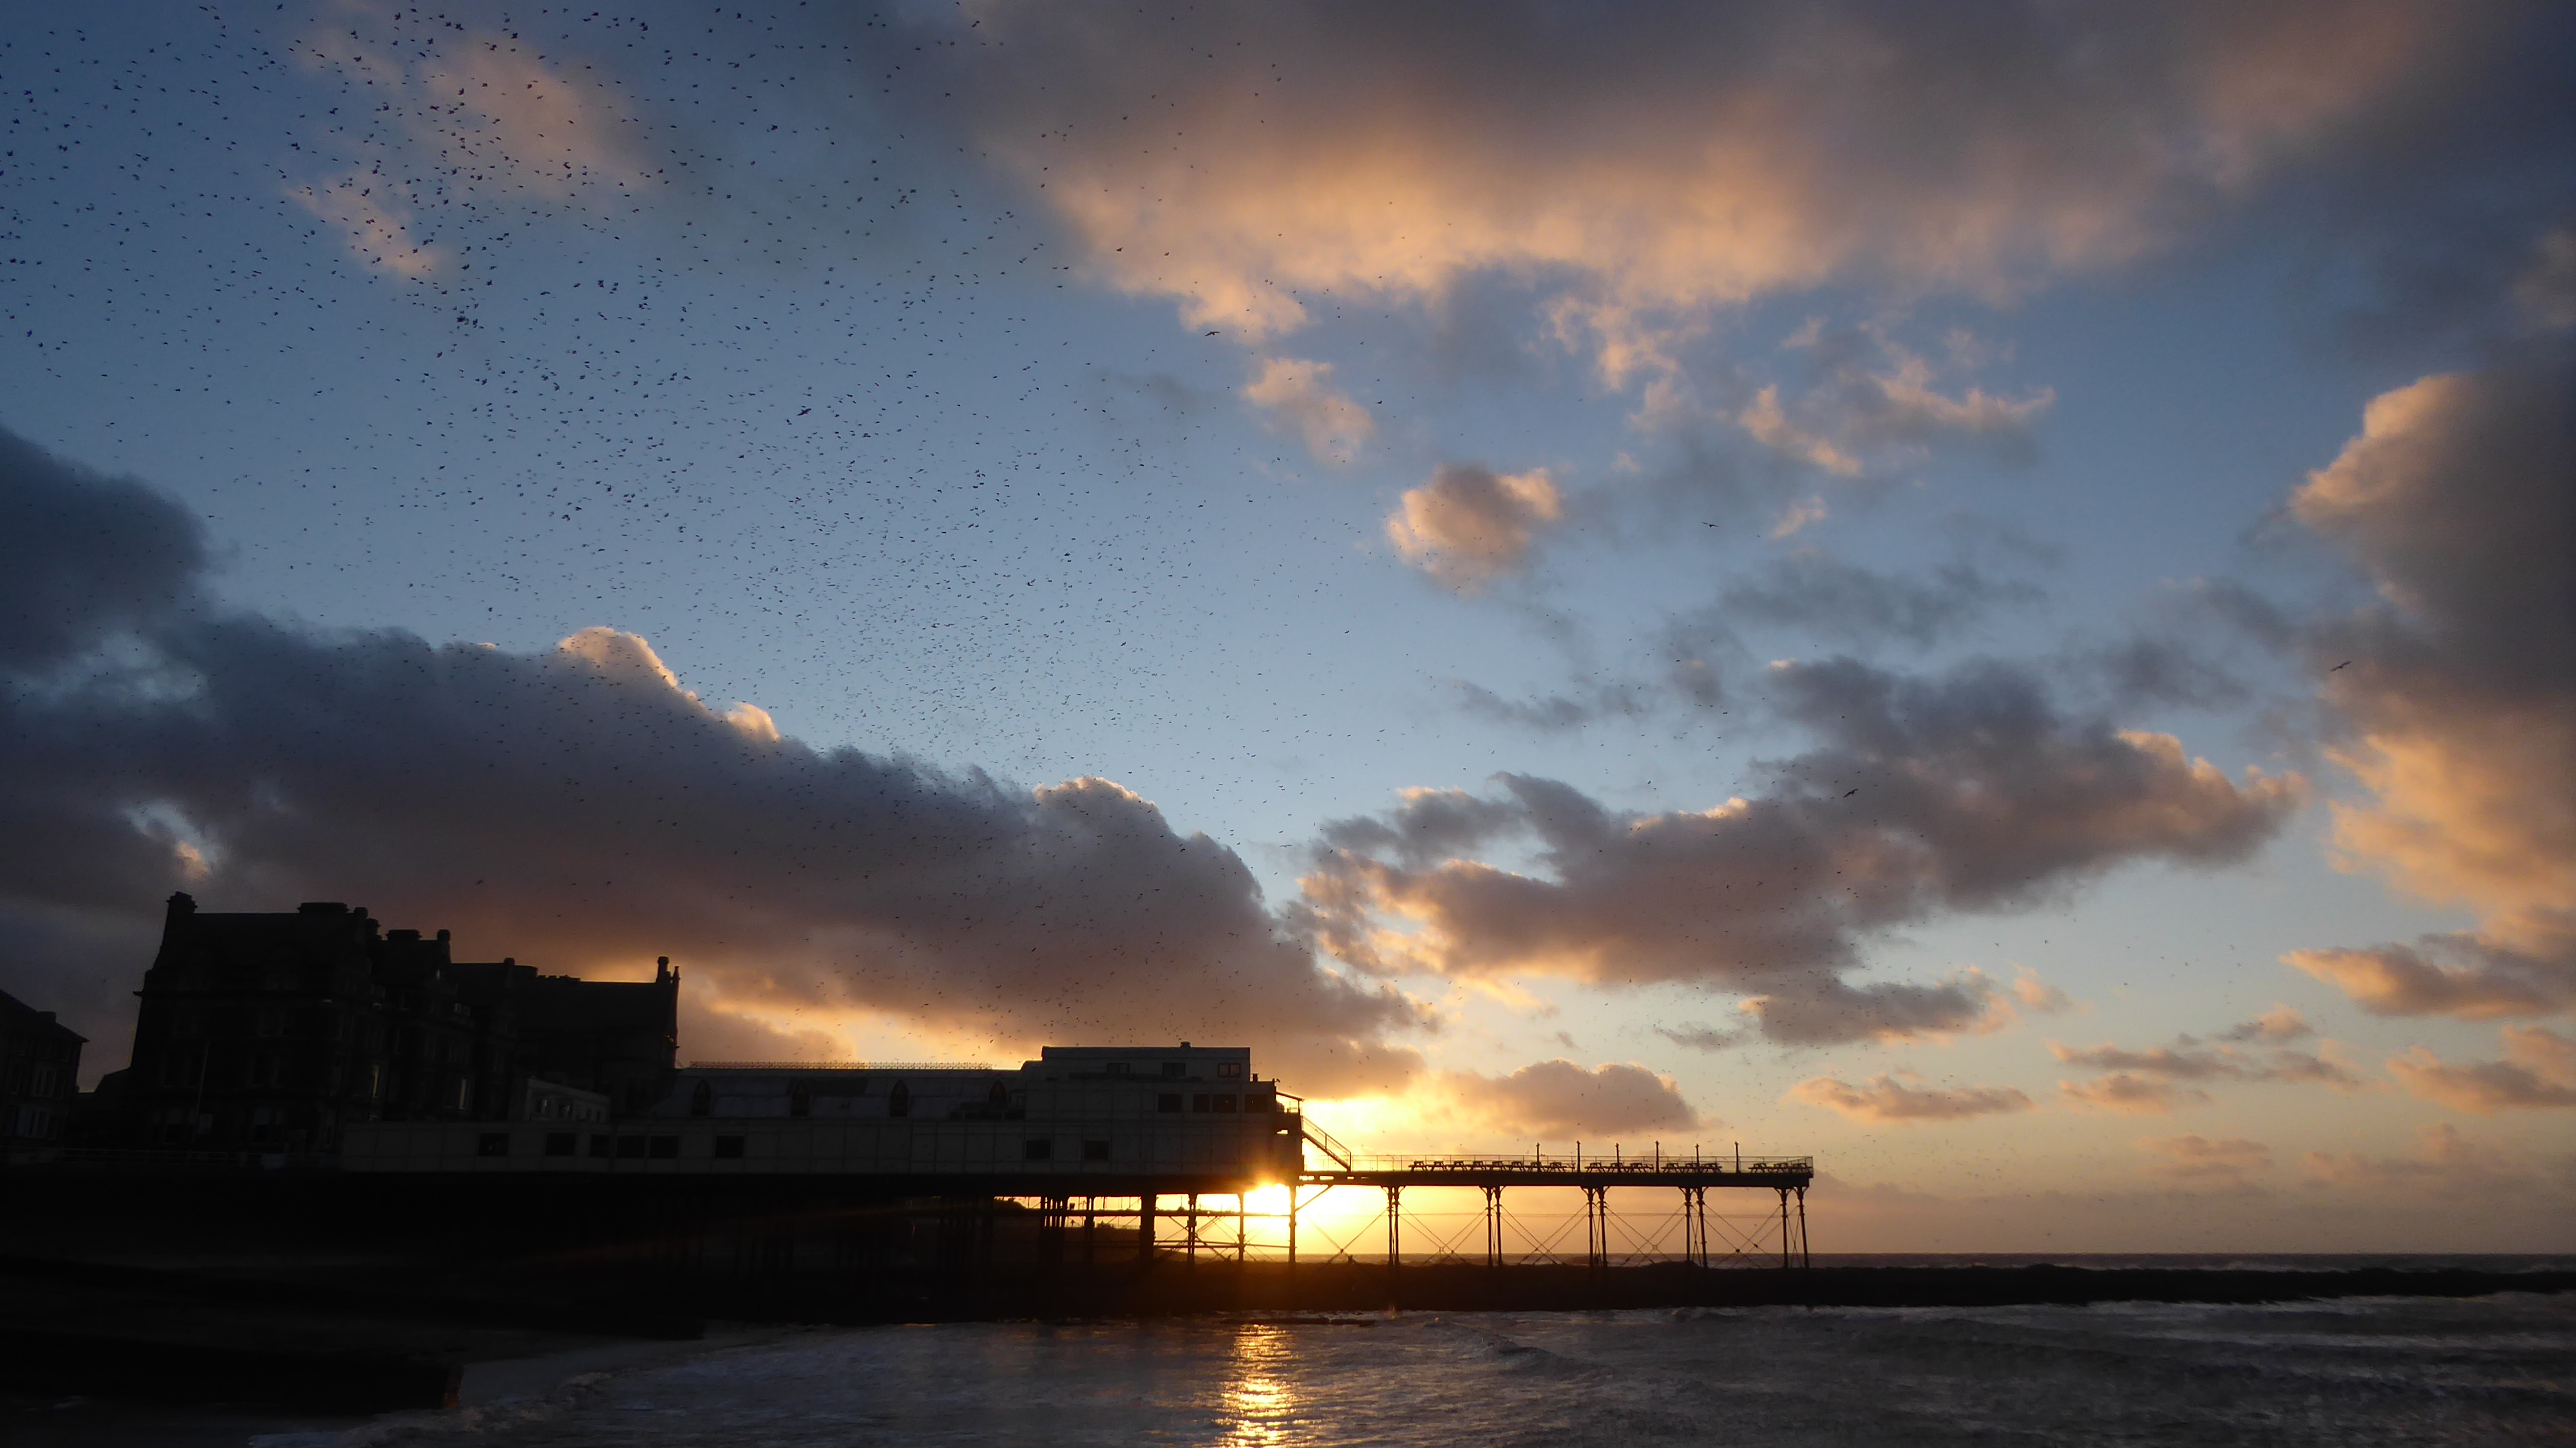 starlings coming into roost under the pier